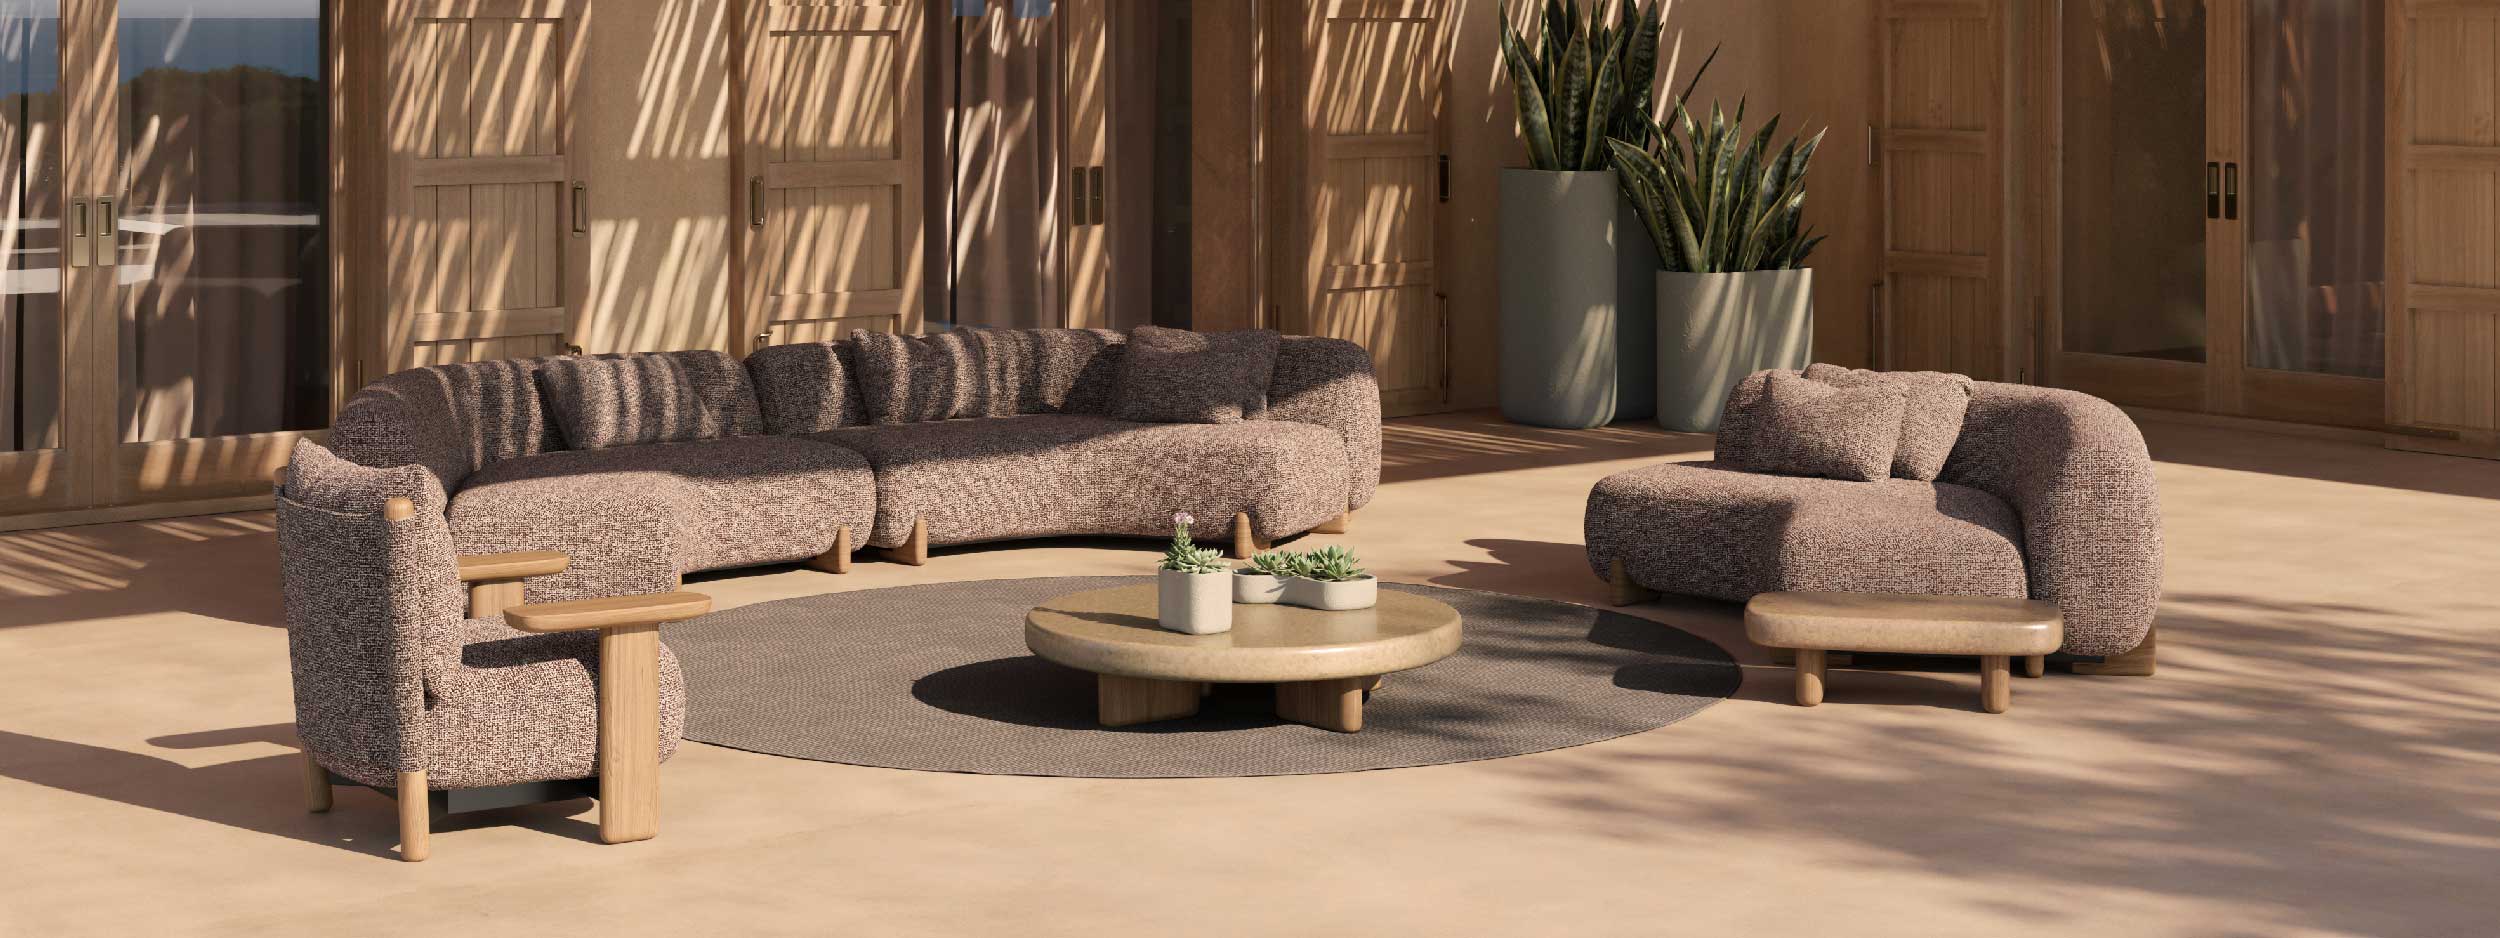 Image of Milos semi-circle garden sofa and upholstered lounge chairs around round concrete table on sunny terrace